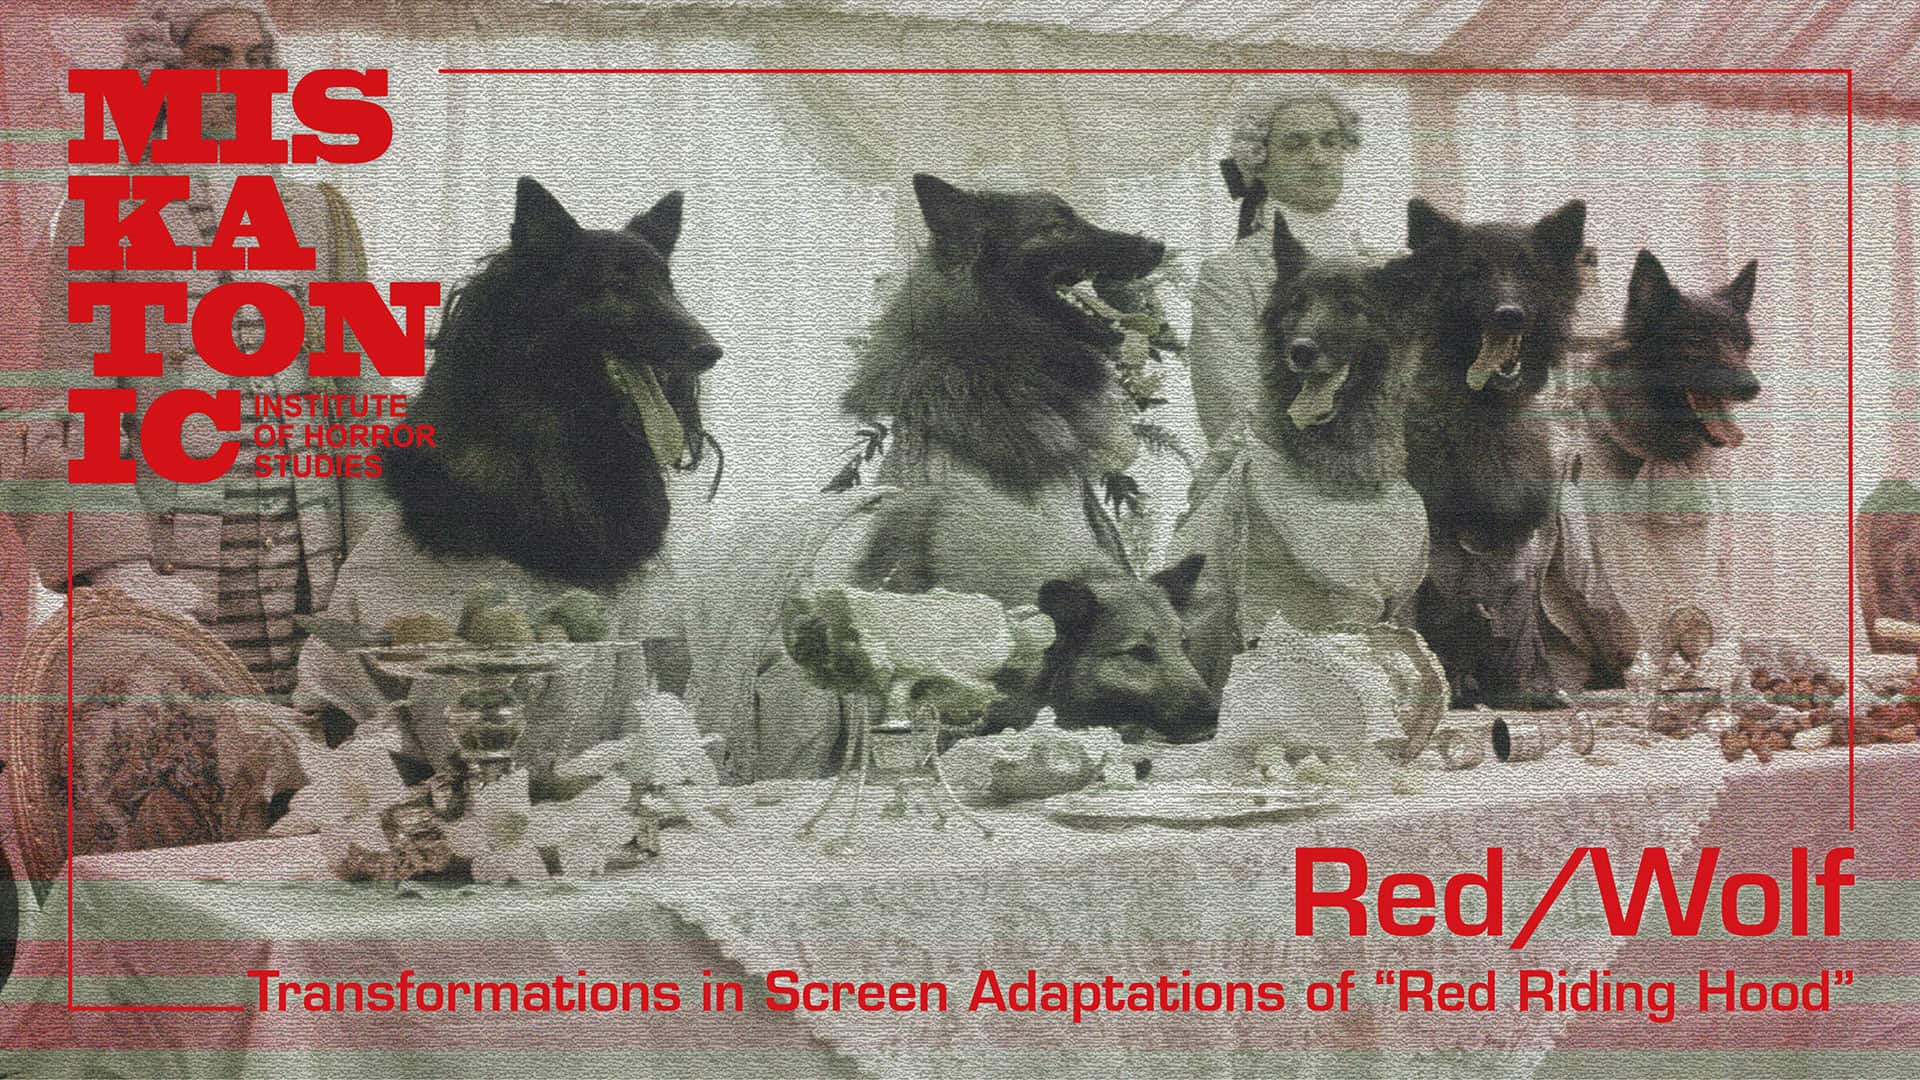 Red/Wolf: Transformations in Screen Adaptations of “Red Riding Hood” (Online)